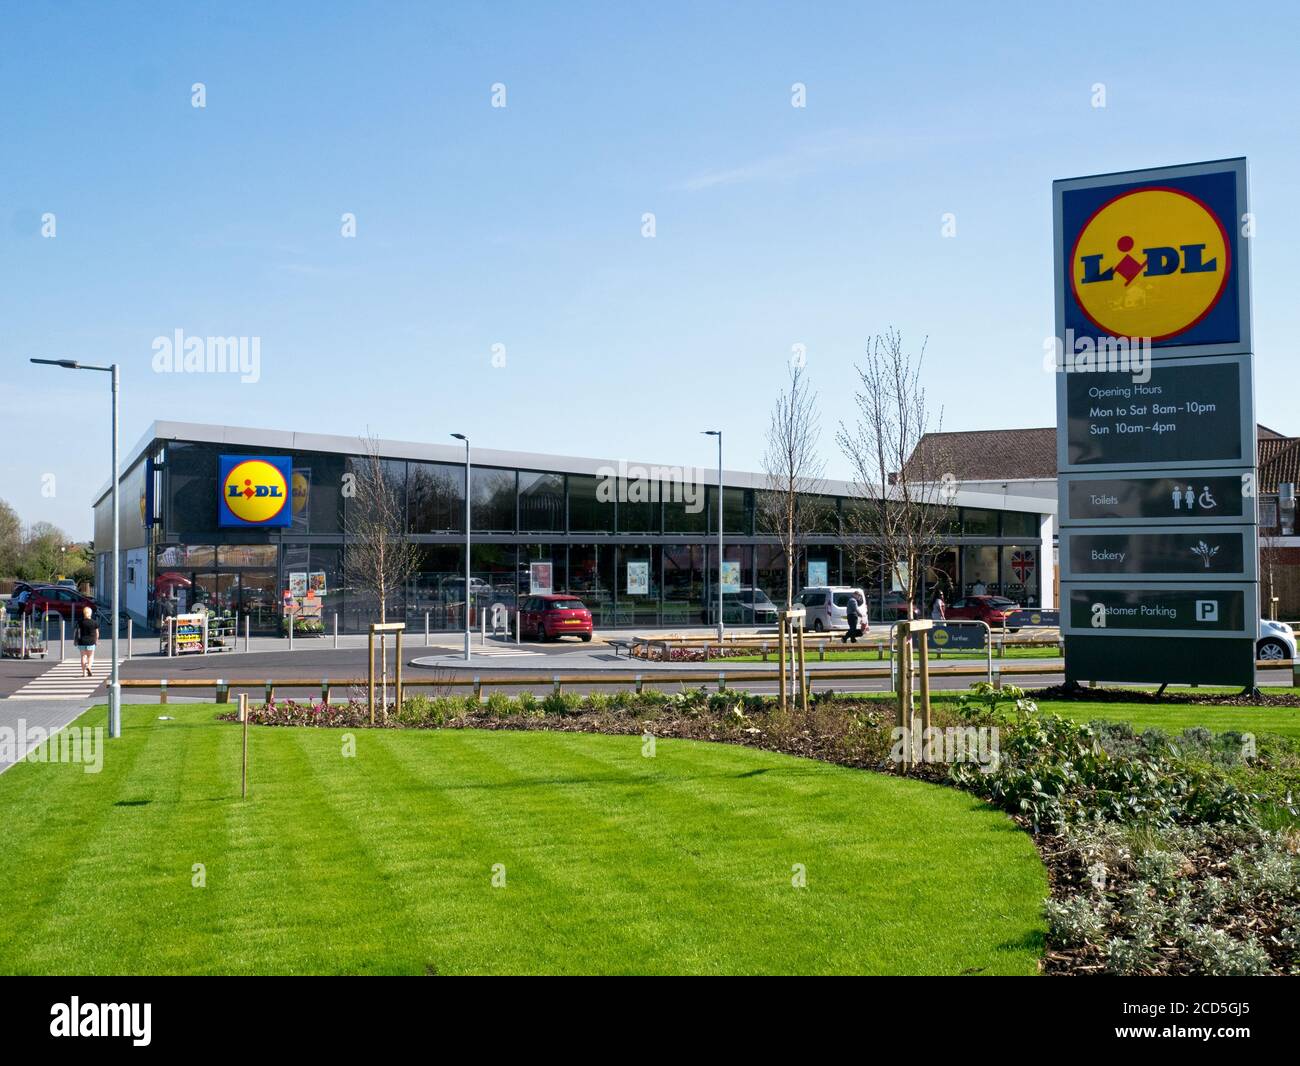 Lidl Superstore newly opened in 2018, in the northern suburbs of Norwich, Norfolk, England, UK Stock Photo